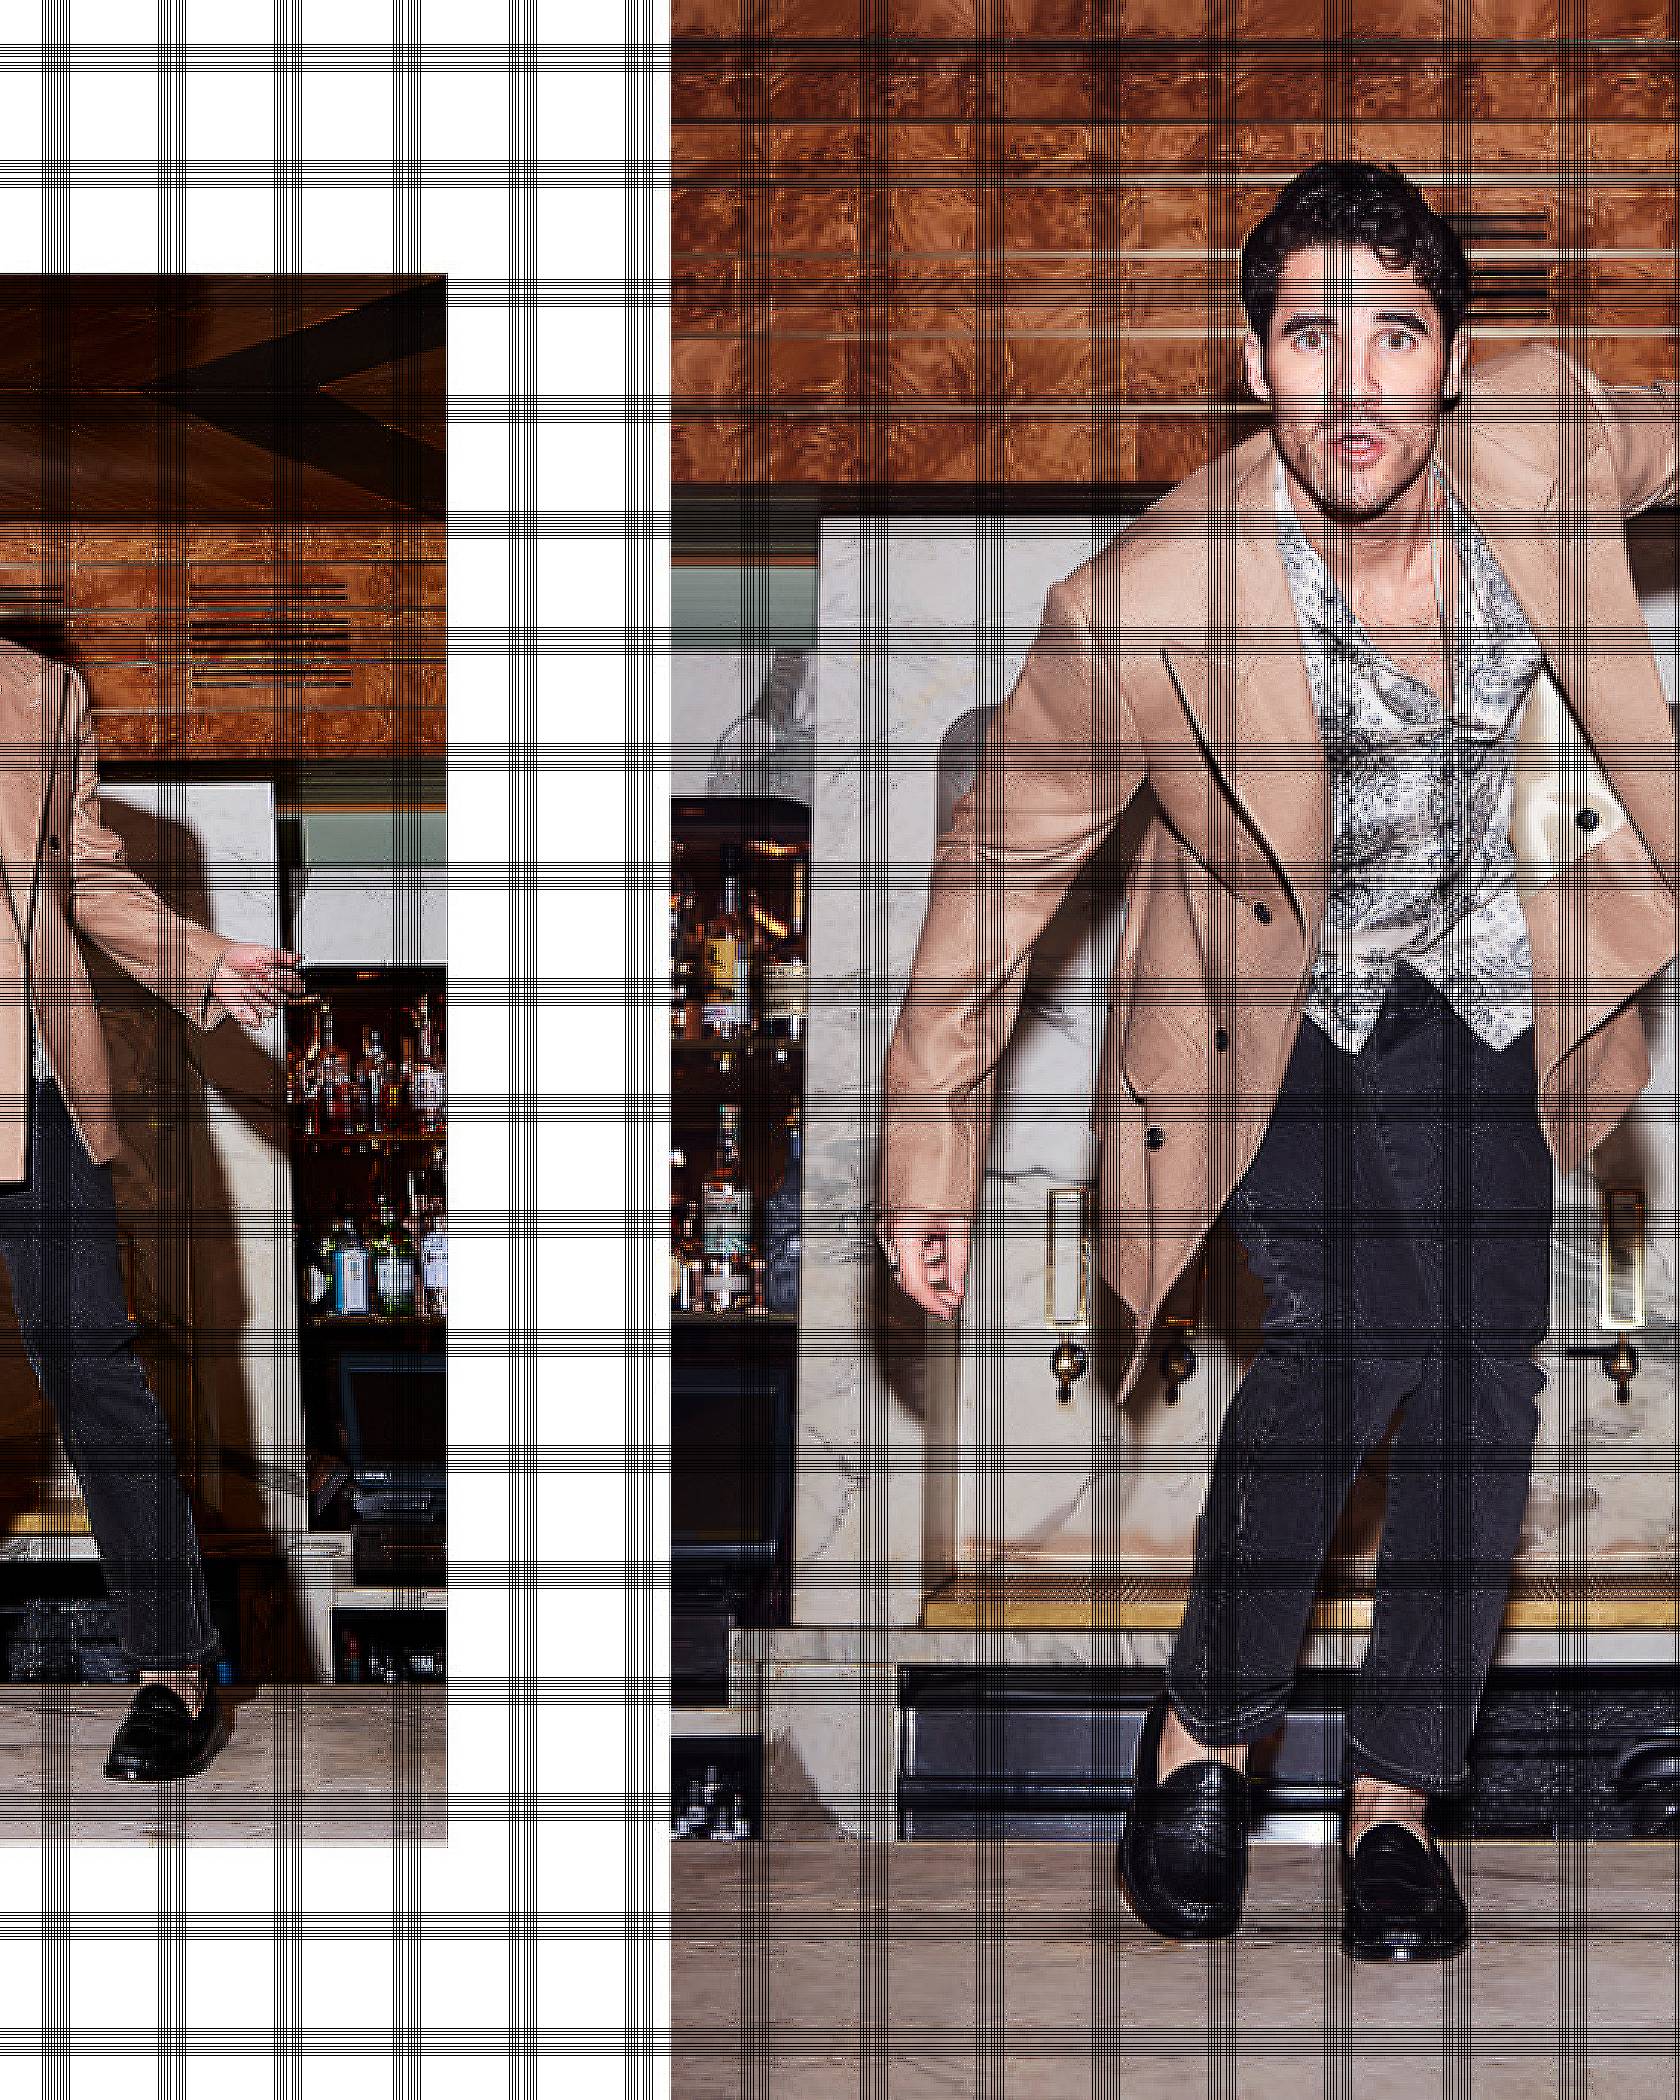 Two images of Criss, both dancing, wearing a beige coat and black jeans.